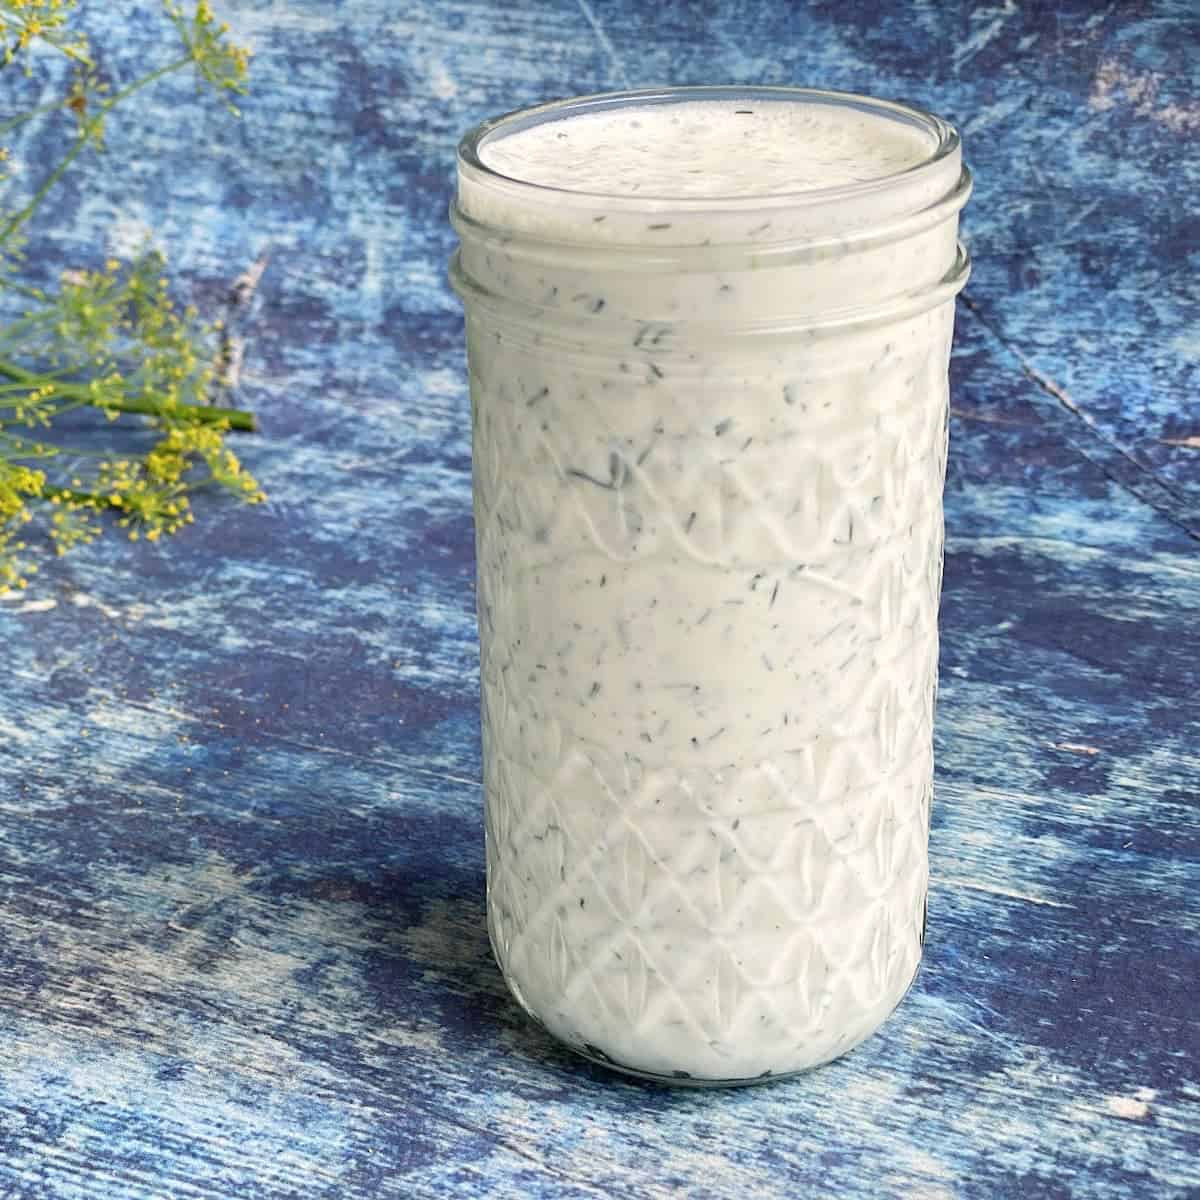 creamy sauce with herbs in a tall jar on wood background painted in blue.